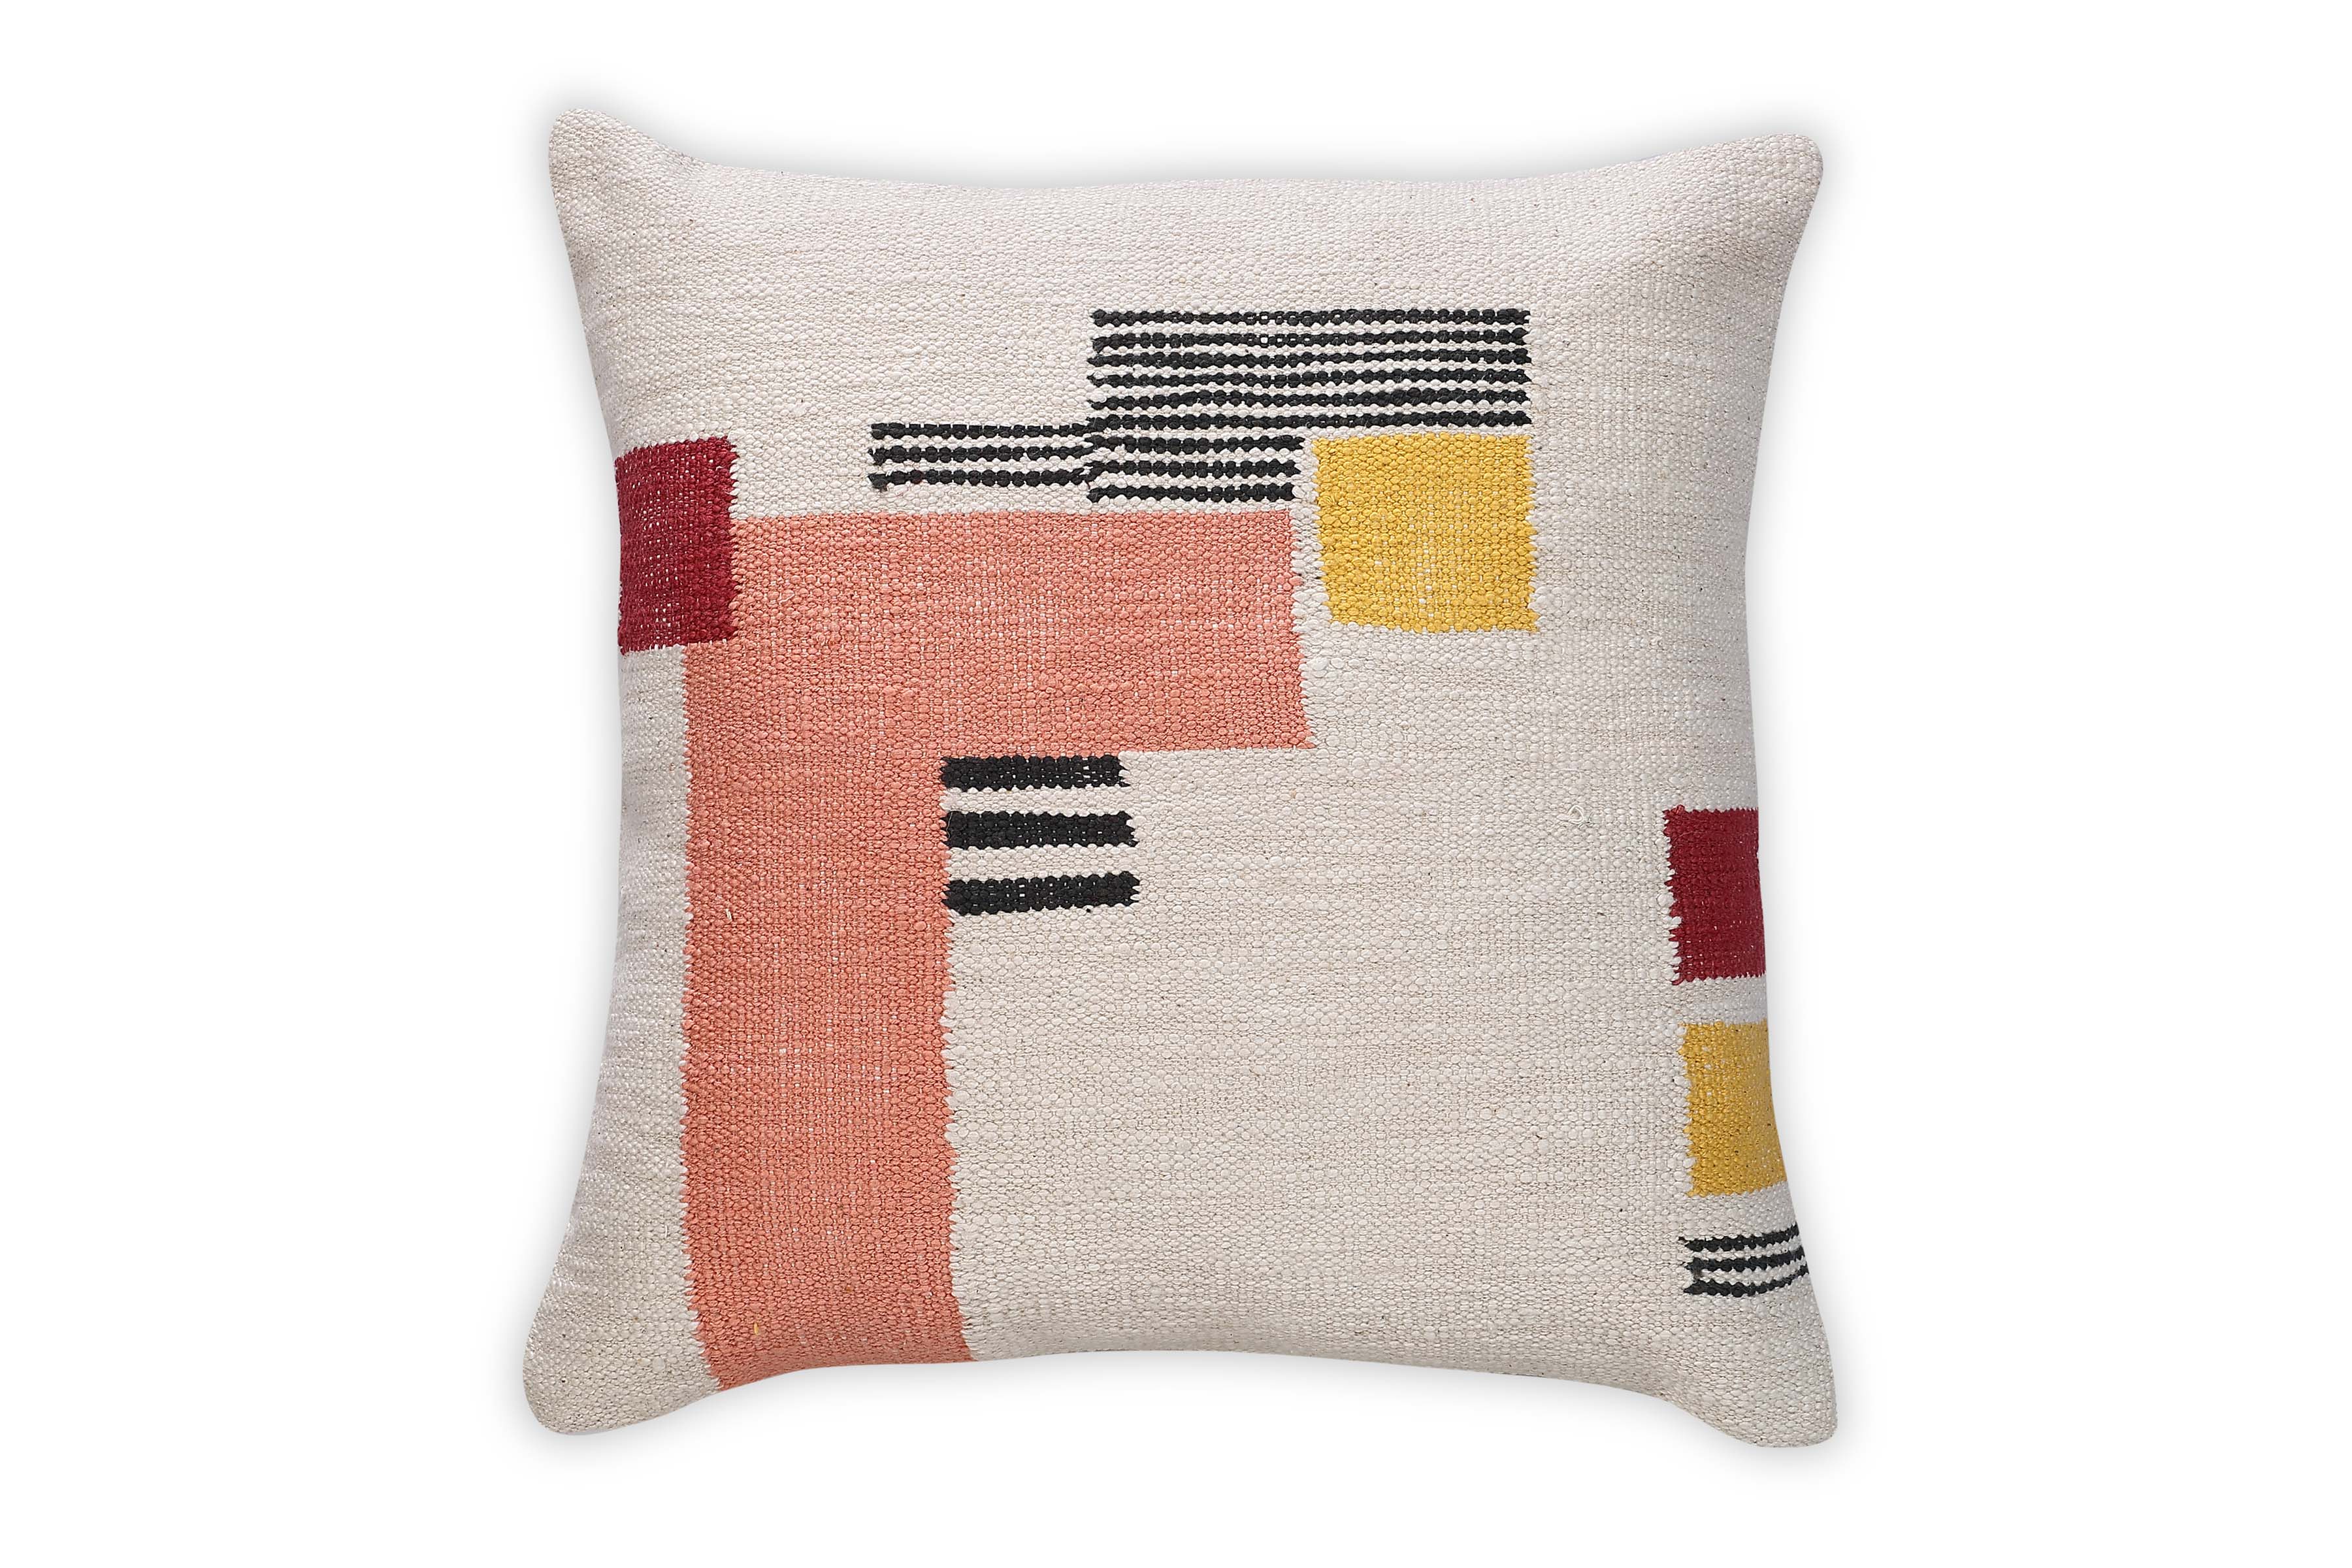 Rani Handwoven Patch Pillow, Pink - 18x18 Inch